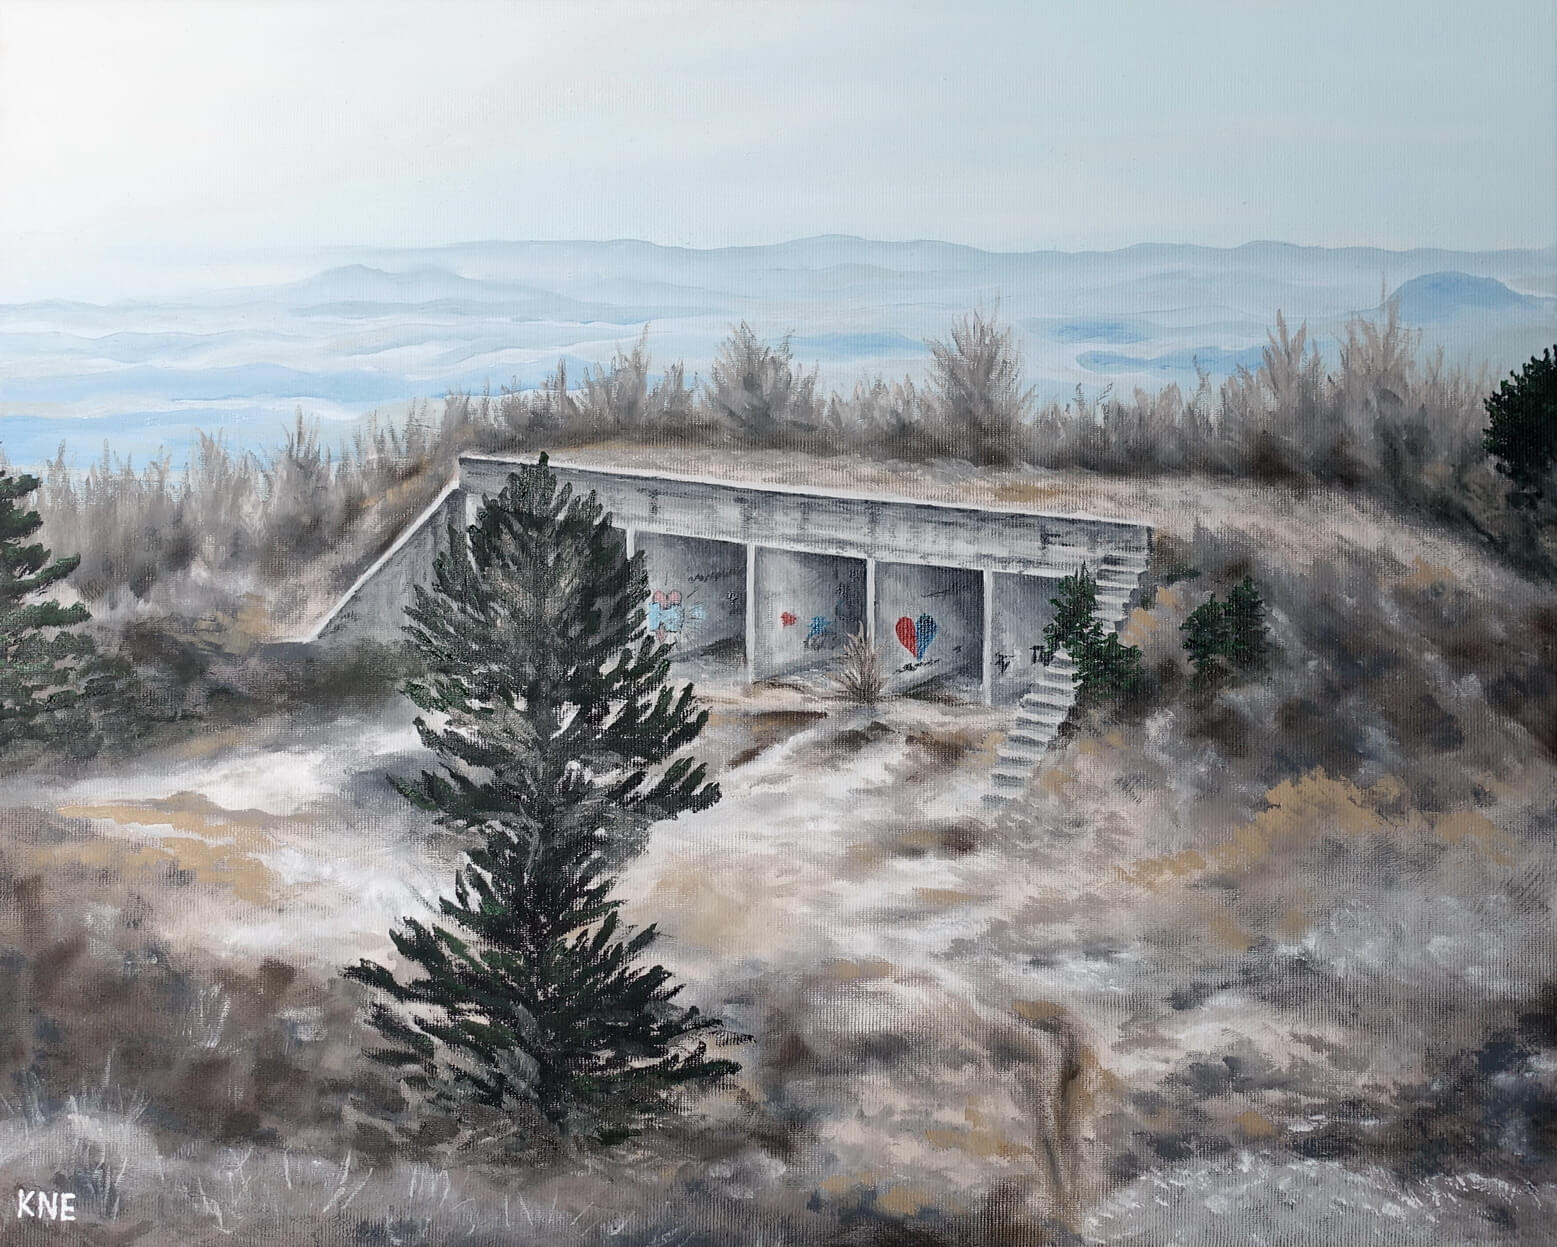 Remains of an Abandoned Missile Base painting